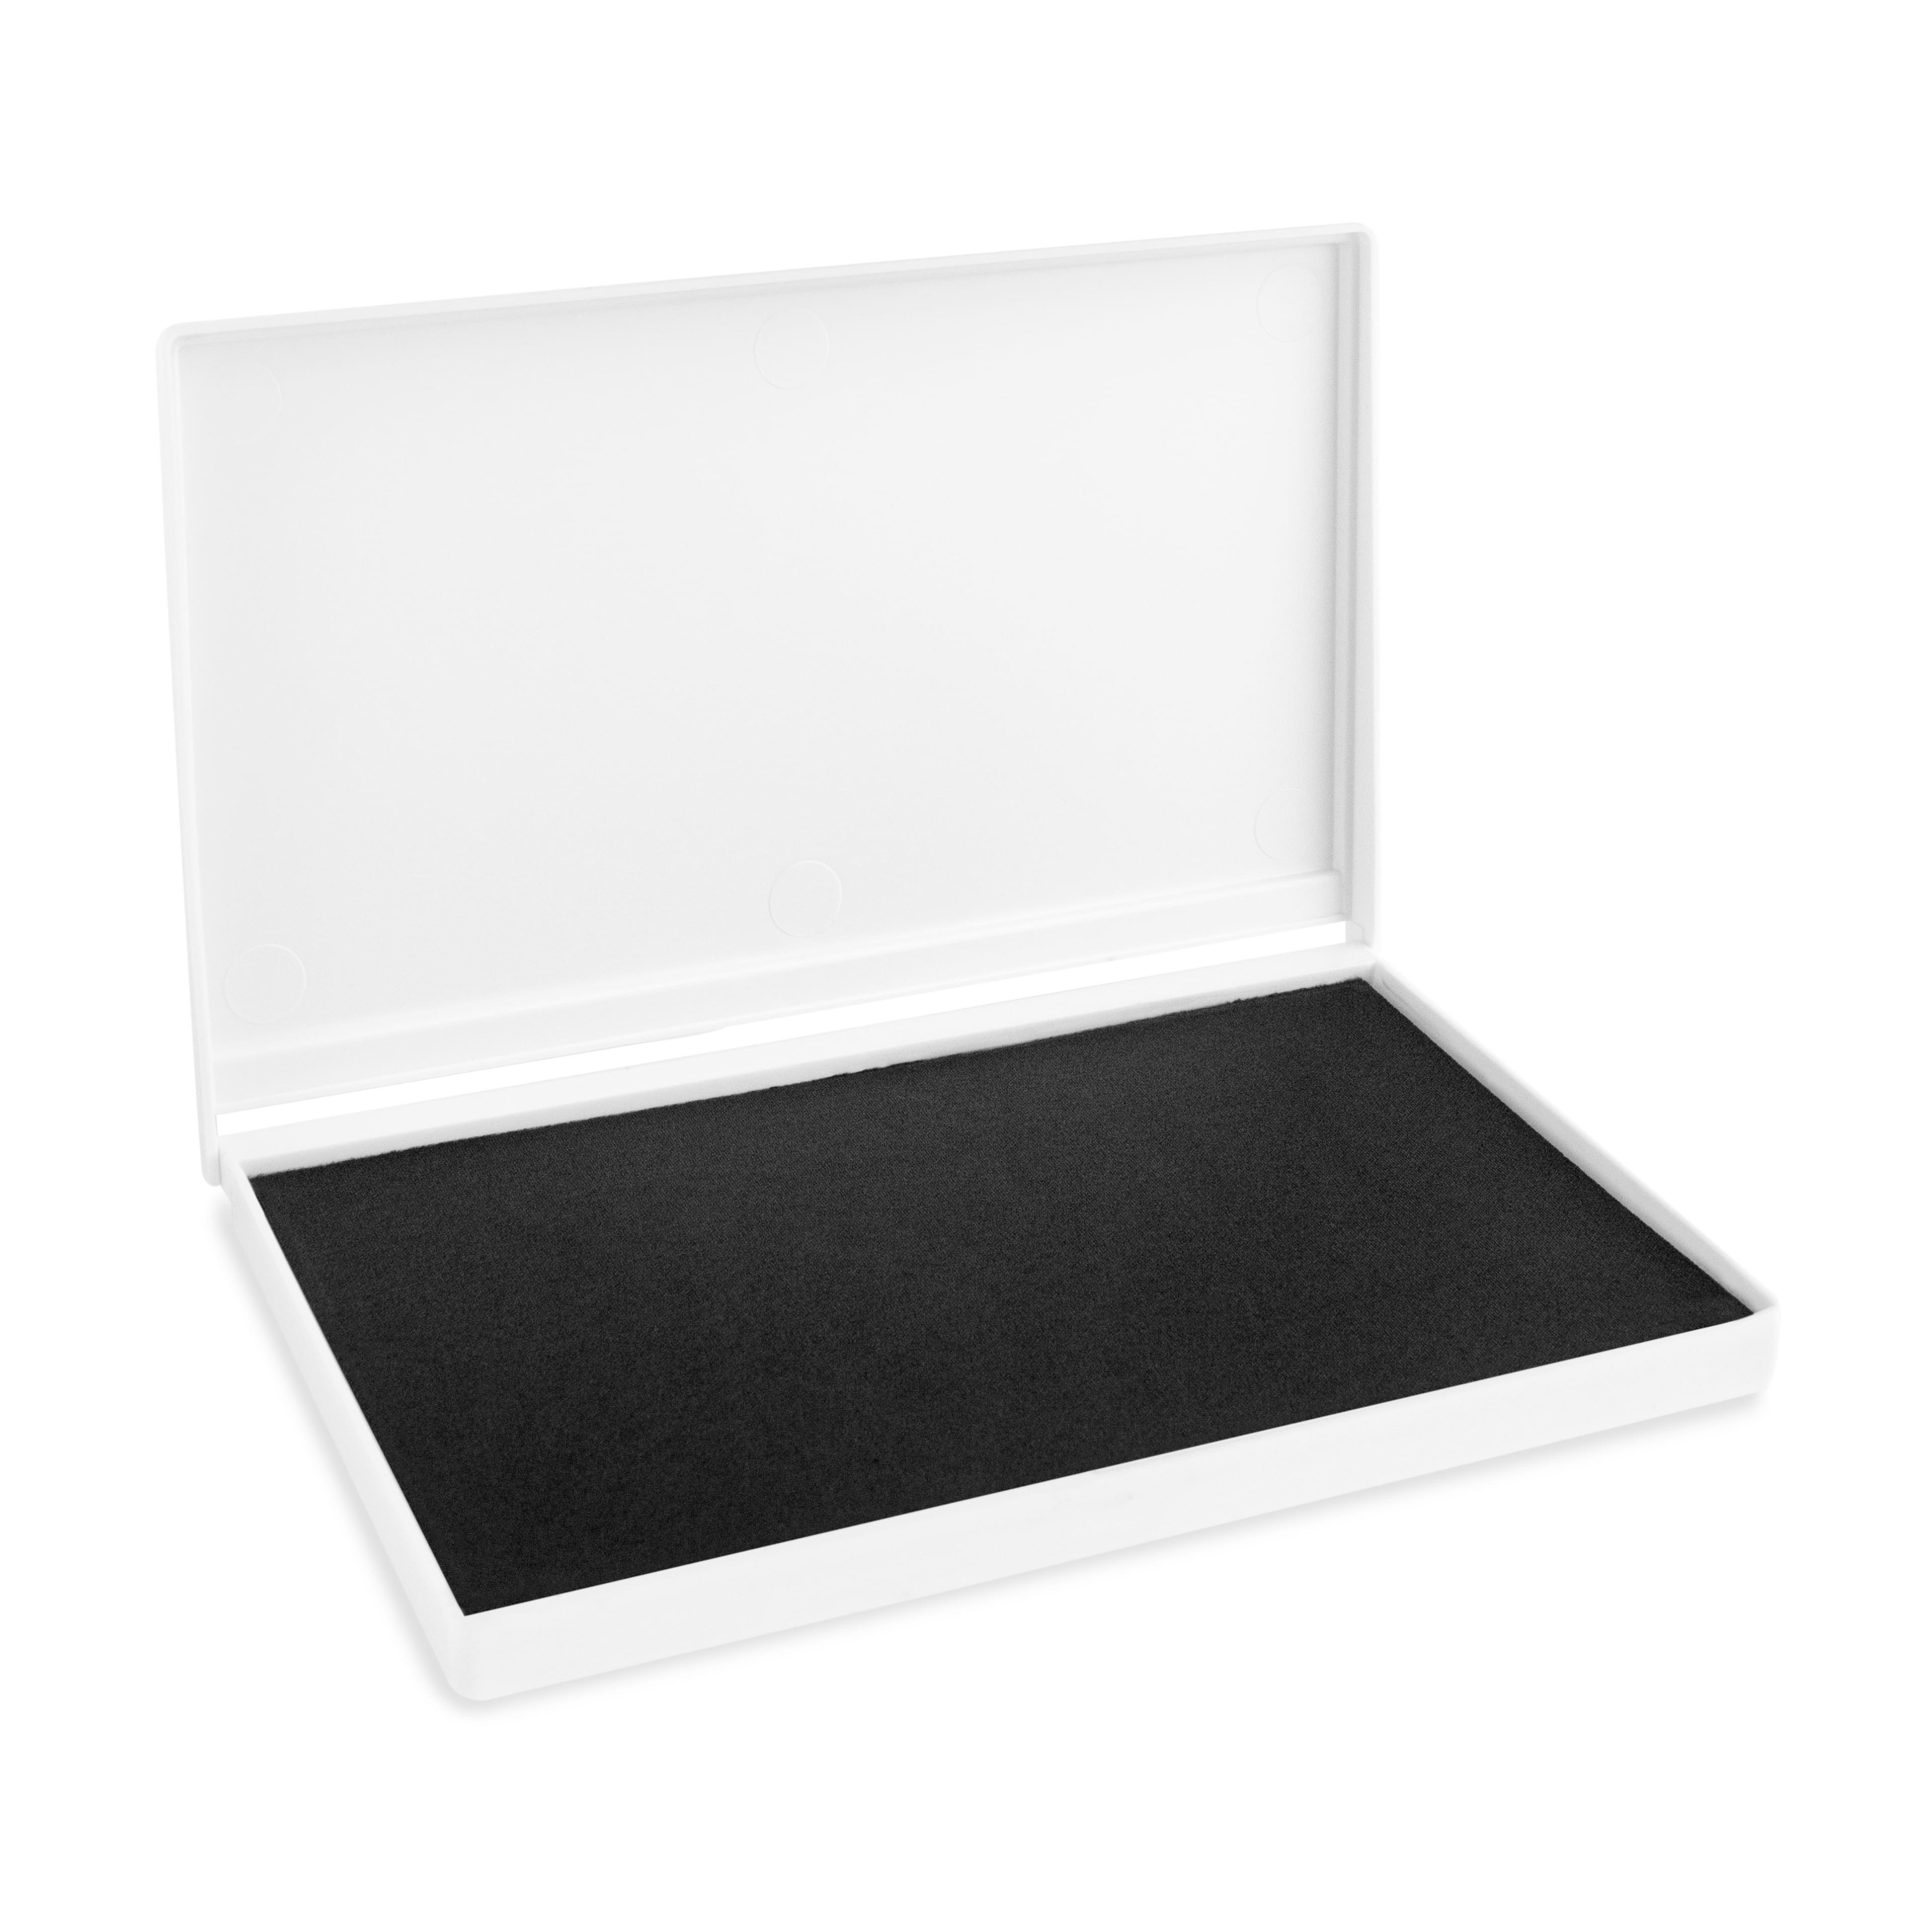 Archival Pigment Ink Pad by Recollections™, Michaels